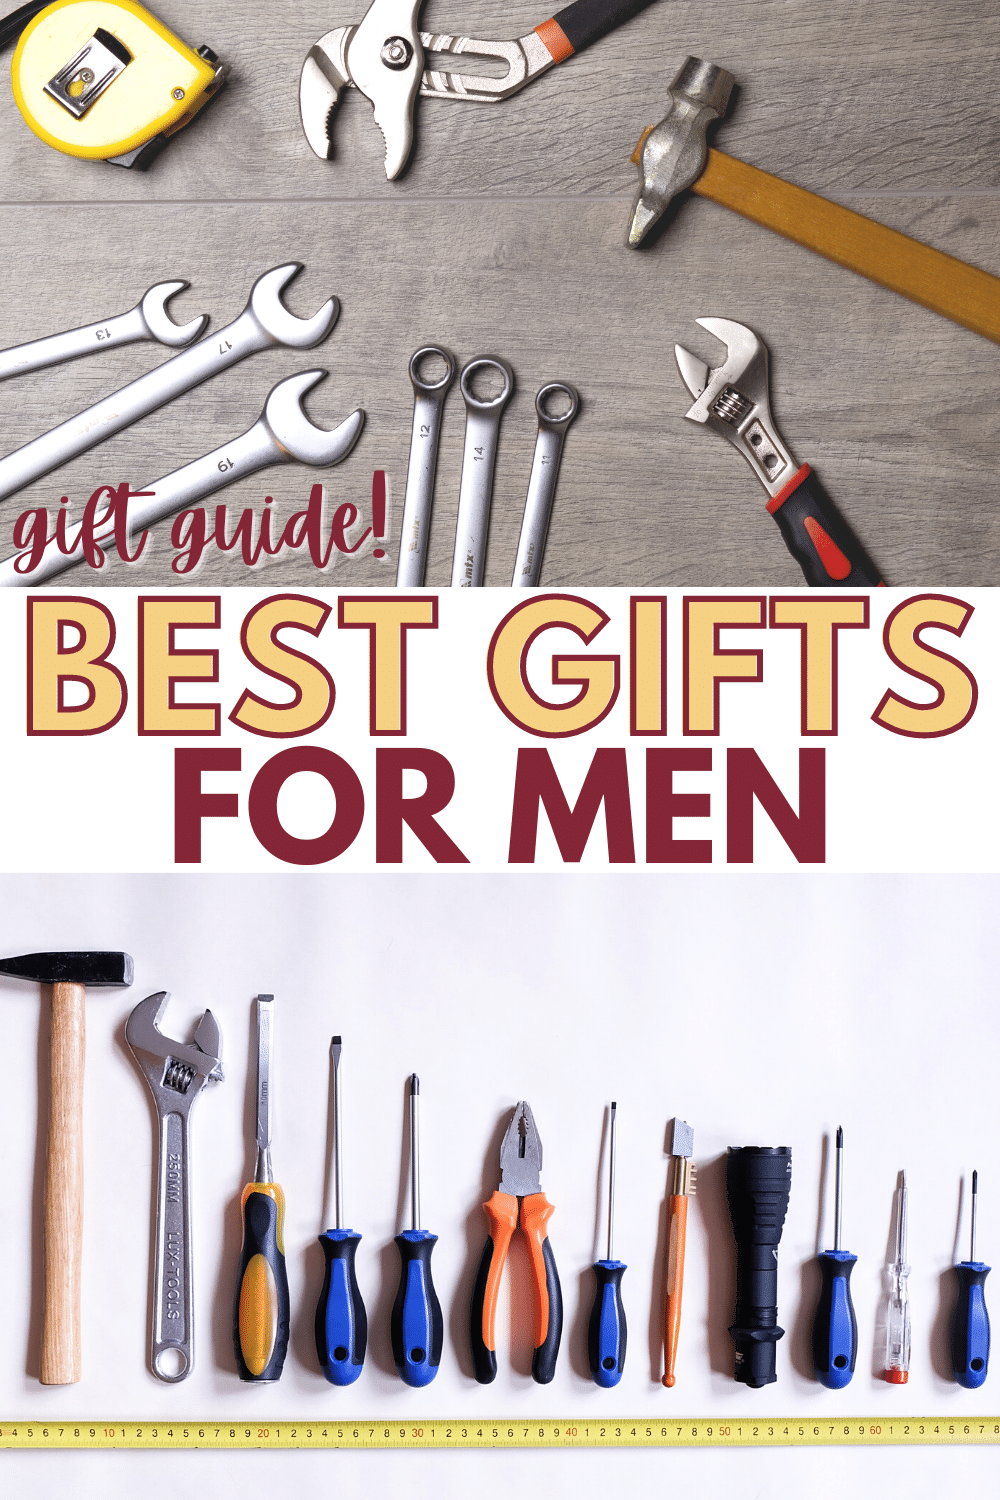 Do you need a gift for a man but it's hard to know what they really want or need? Here's a list of the best gifts for men to help you out. #giftguide #giftideas #forhim #giftsformen via @wondermomwannab